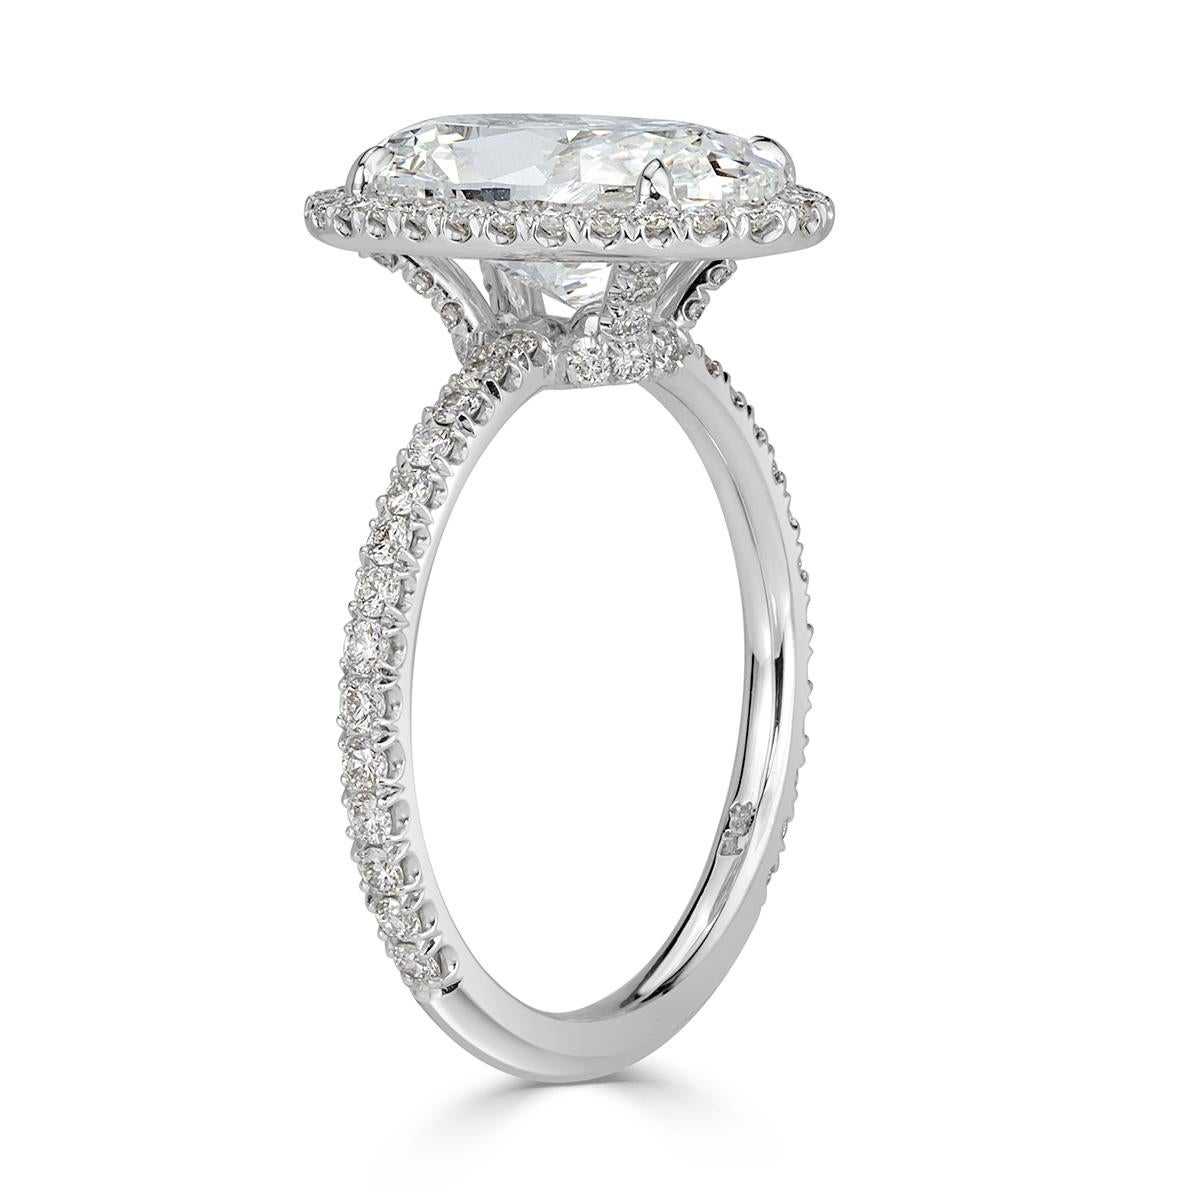 Created in high polish platinum, this sublime diamond engagement ring showcases a unique 4.01ct oval cut center diamond, GIA certified at G-SI1. It faces up absolutely white and is perfectly eye clean! It is accented by a dainty micro pavé halo as